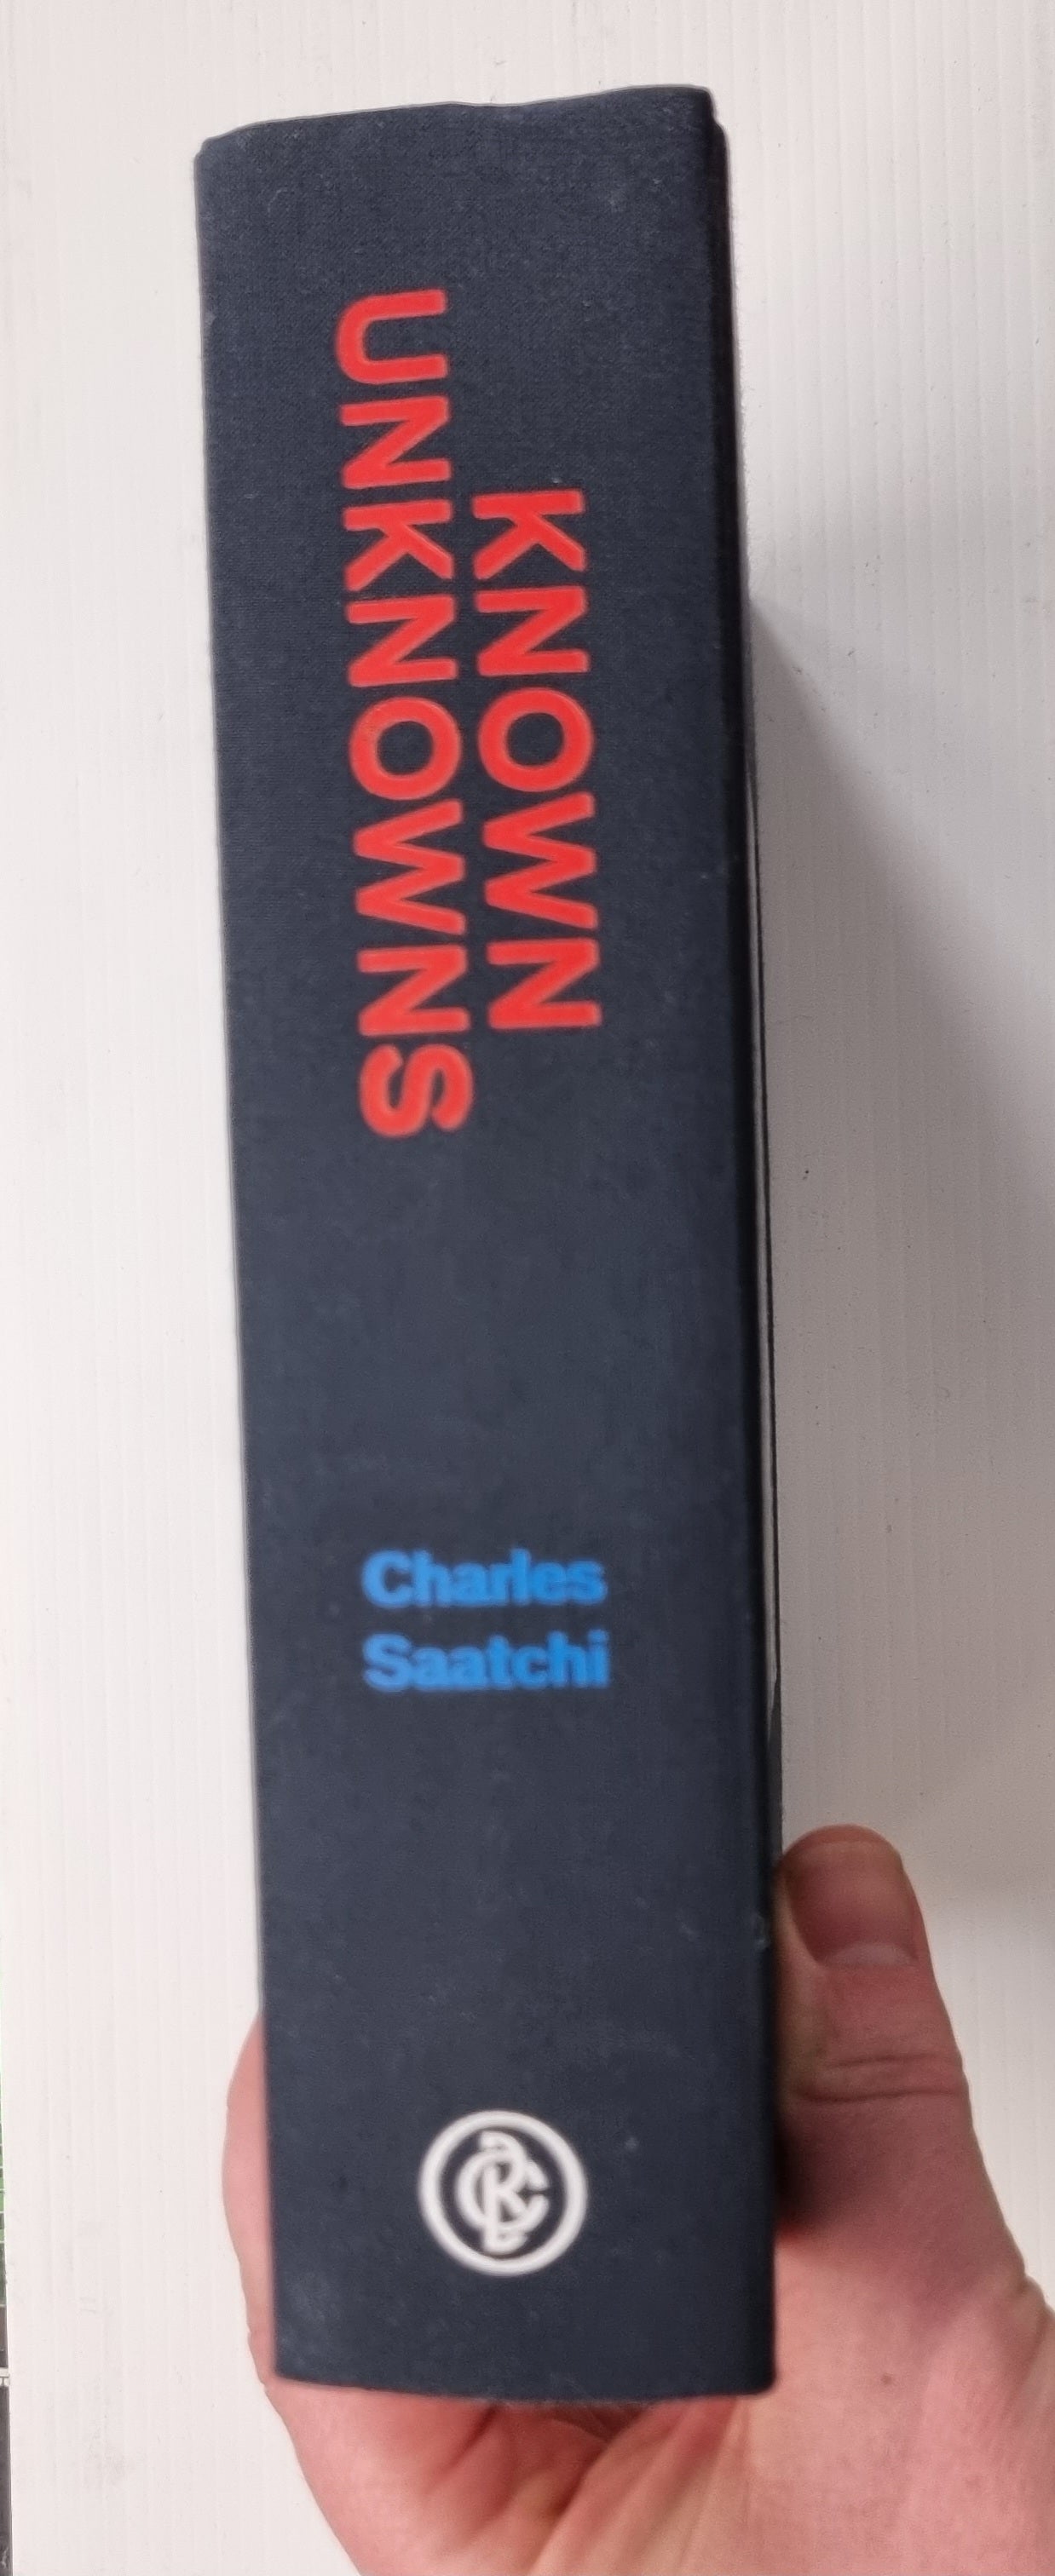 Known Unknowns by Charles Saatchi